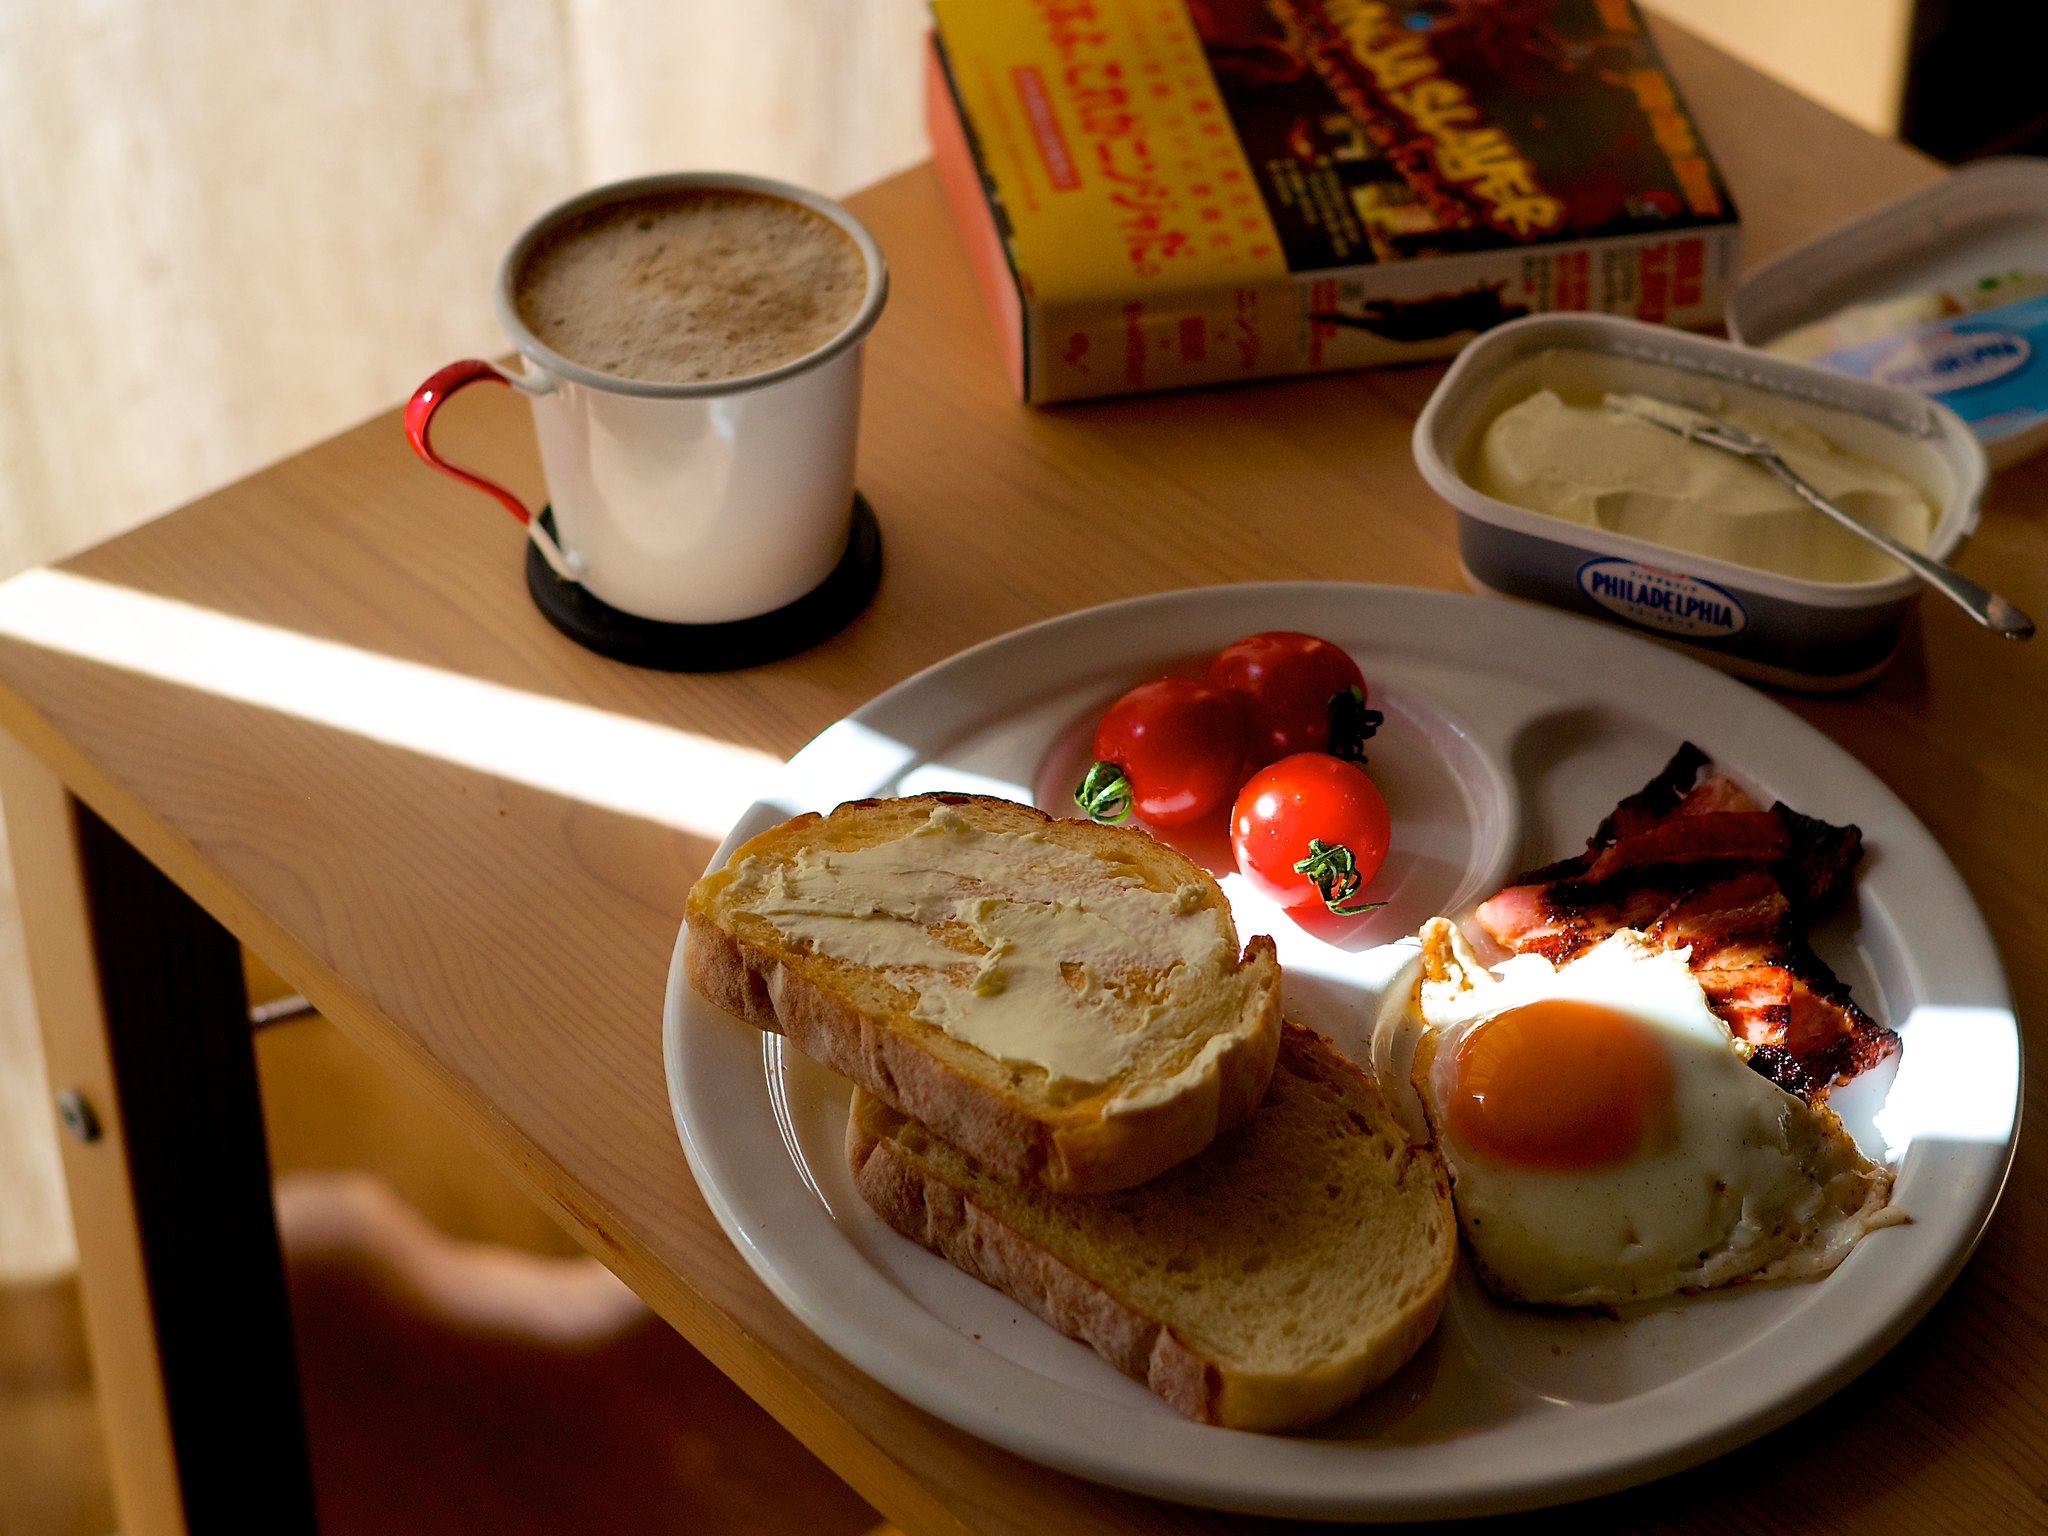 A table with a plate full of eggs and toast, a mug full of hot beverage and a book sit in a sunbeam.